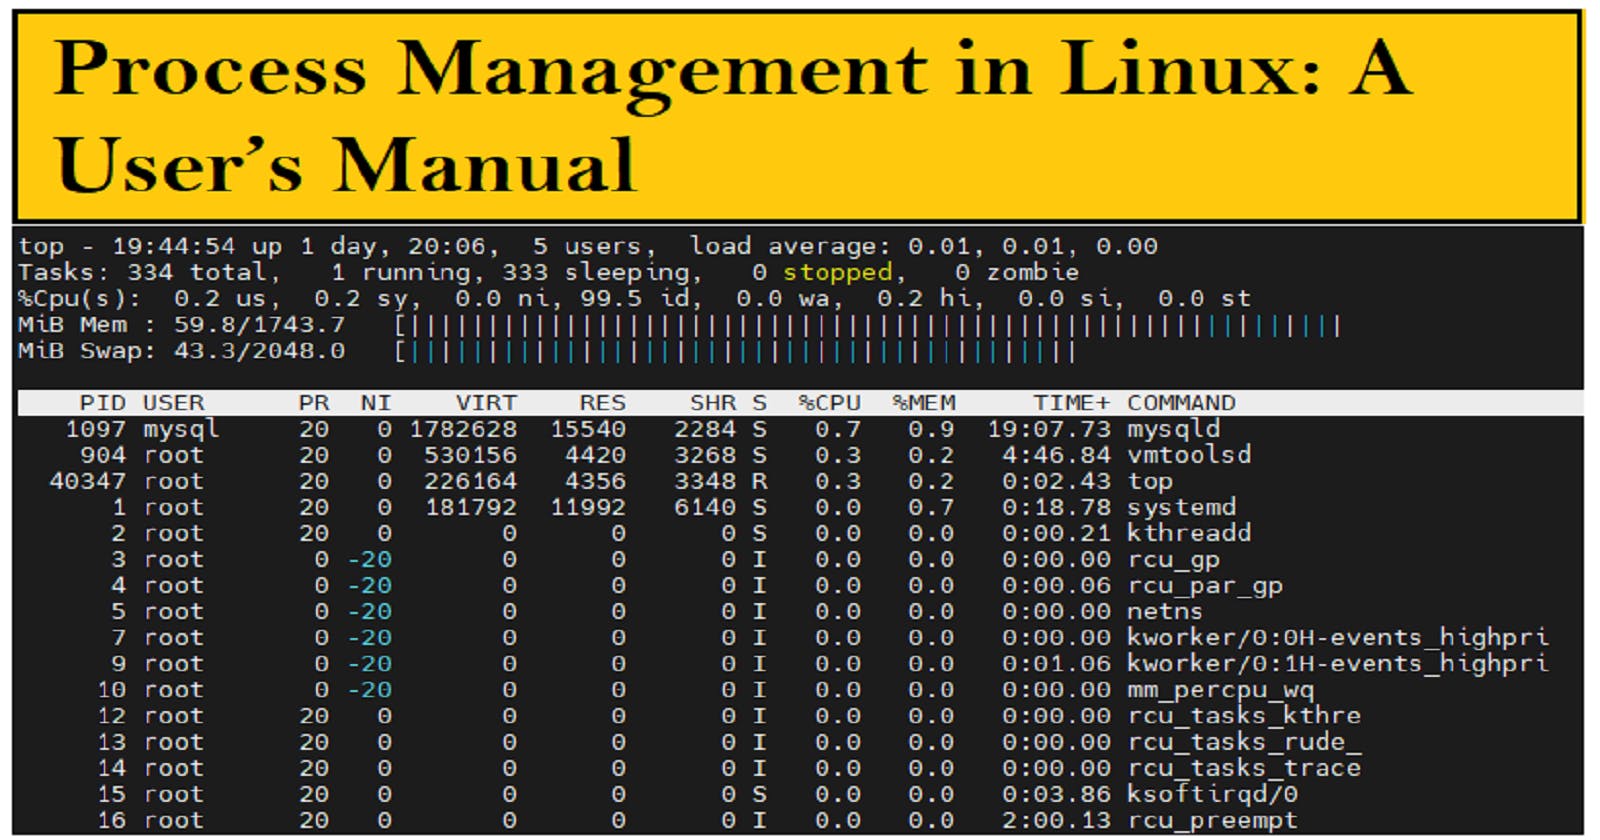 Process Management in Linux: A User’s Manual